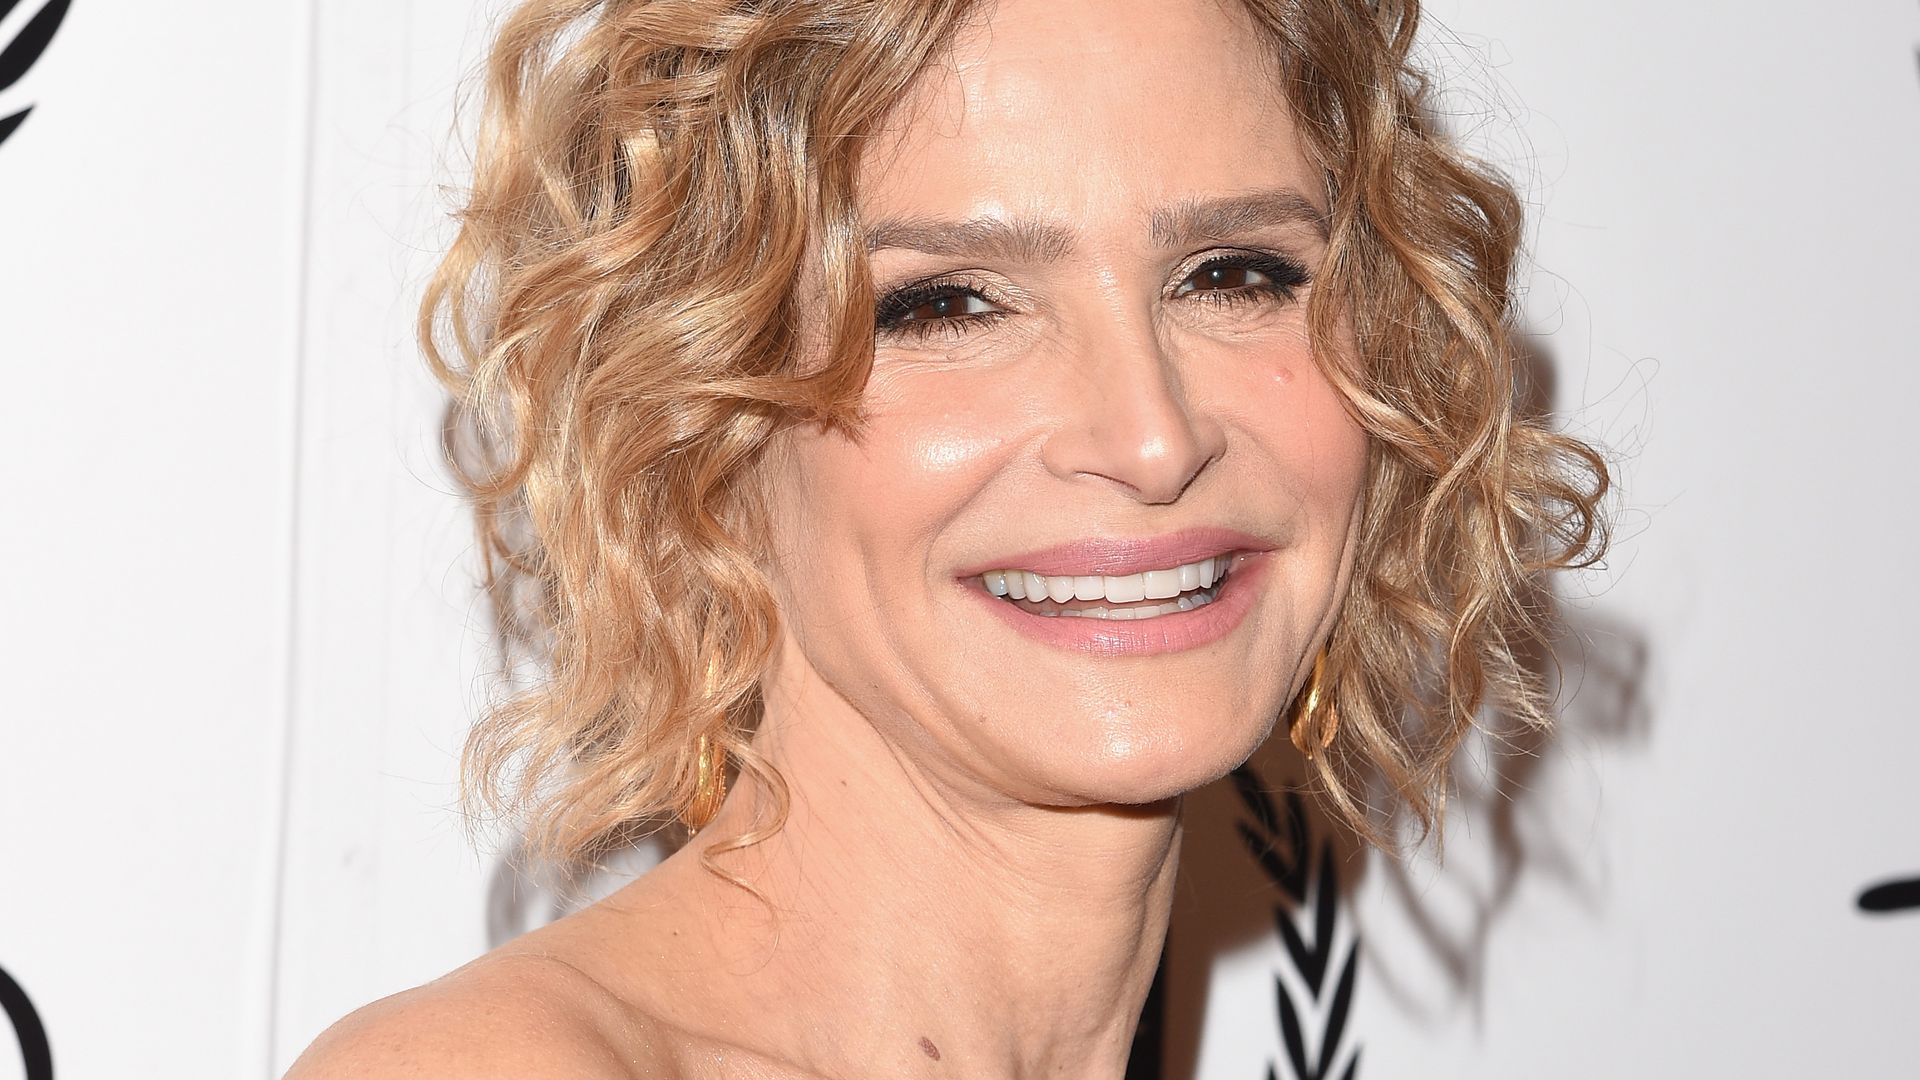 Kyra Sedgwick shares unexpected beach selfie that leaves fans saying the same thing